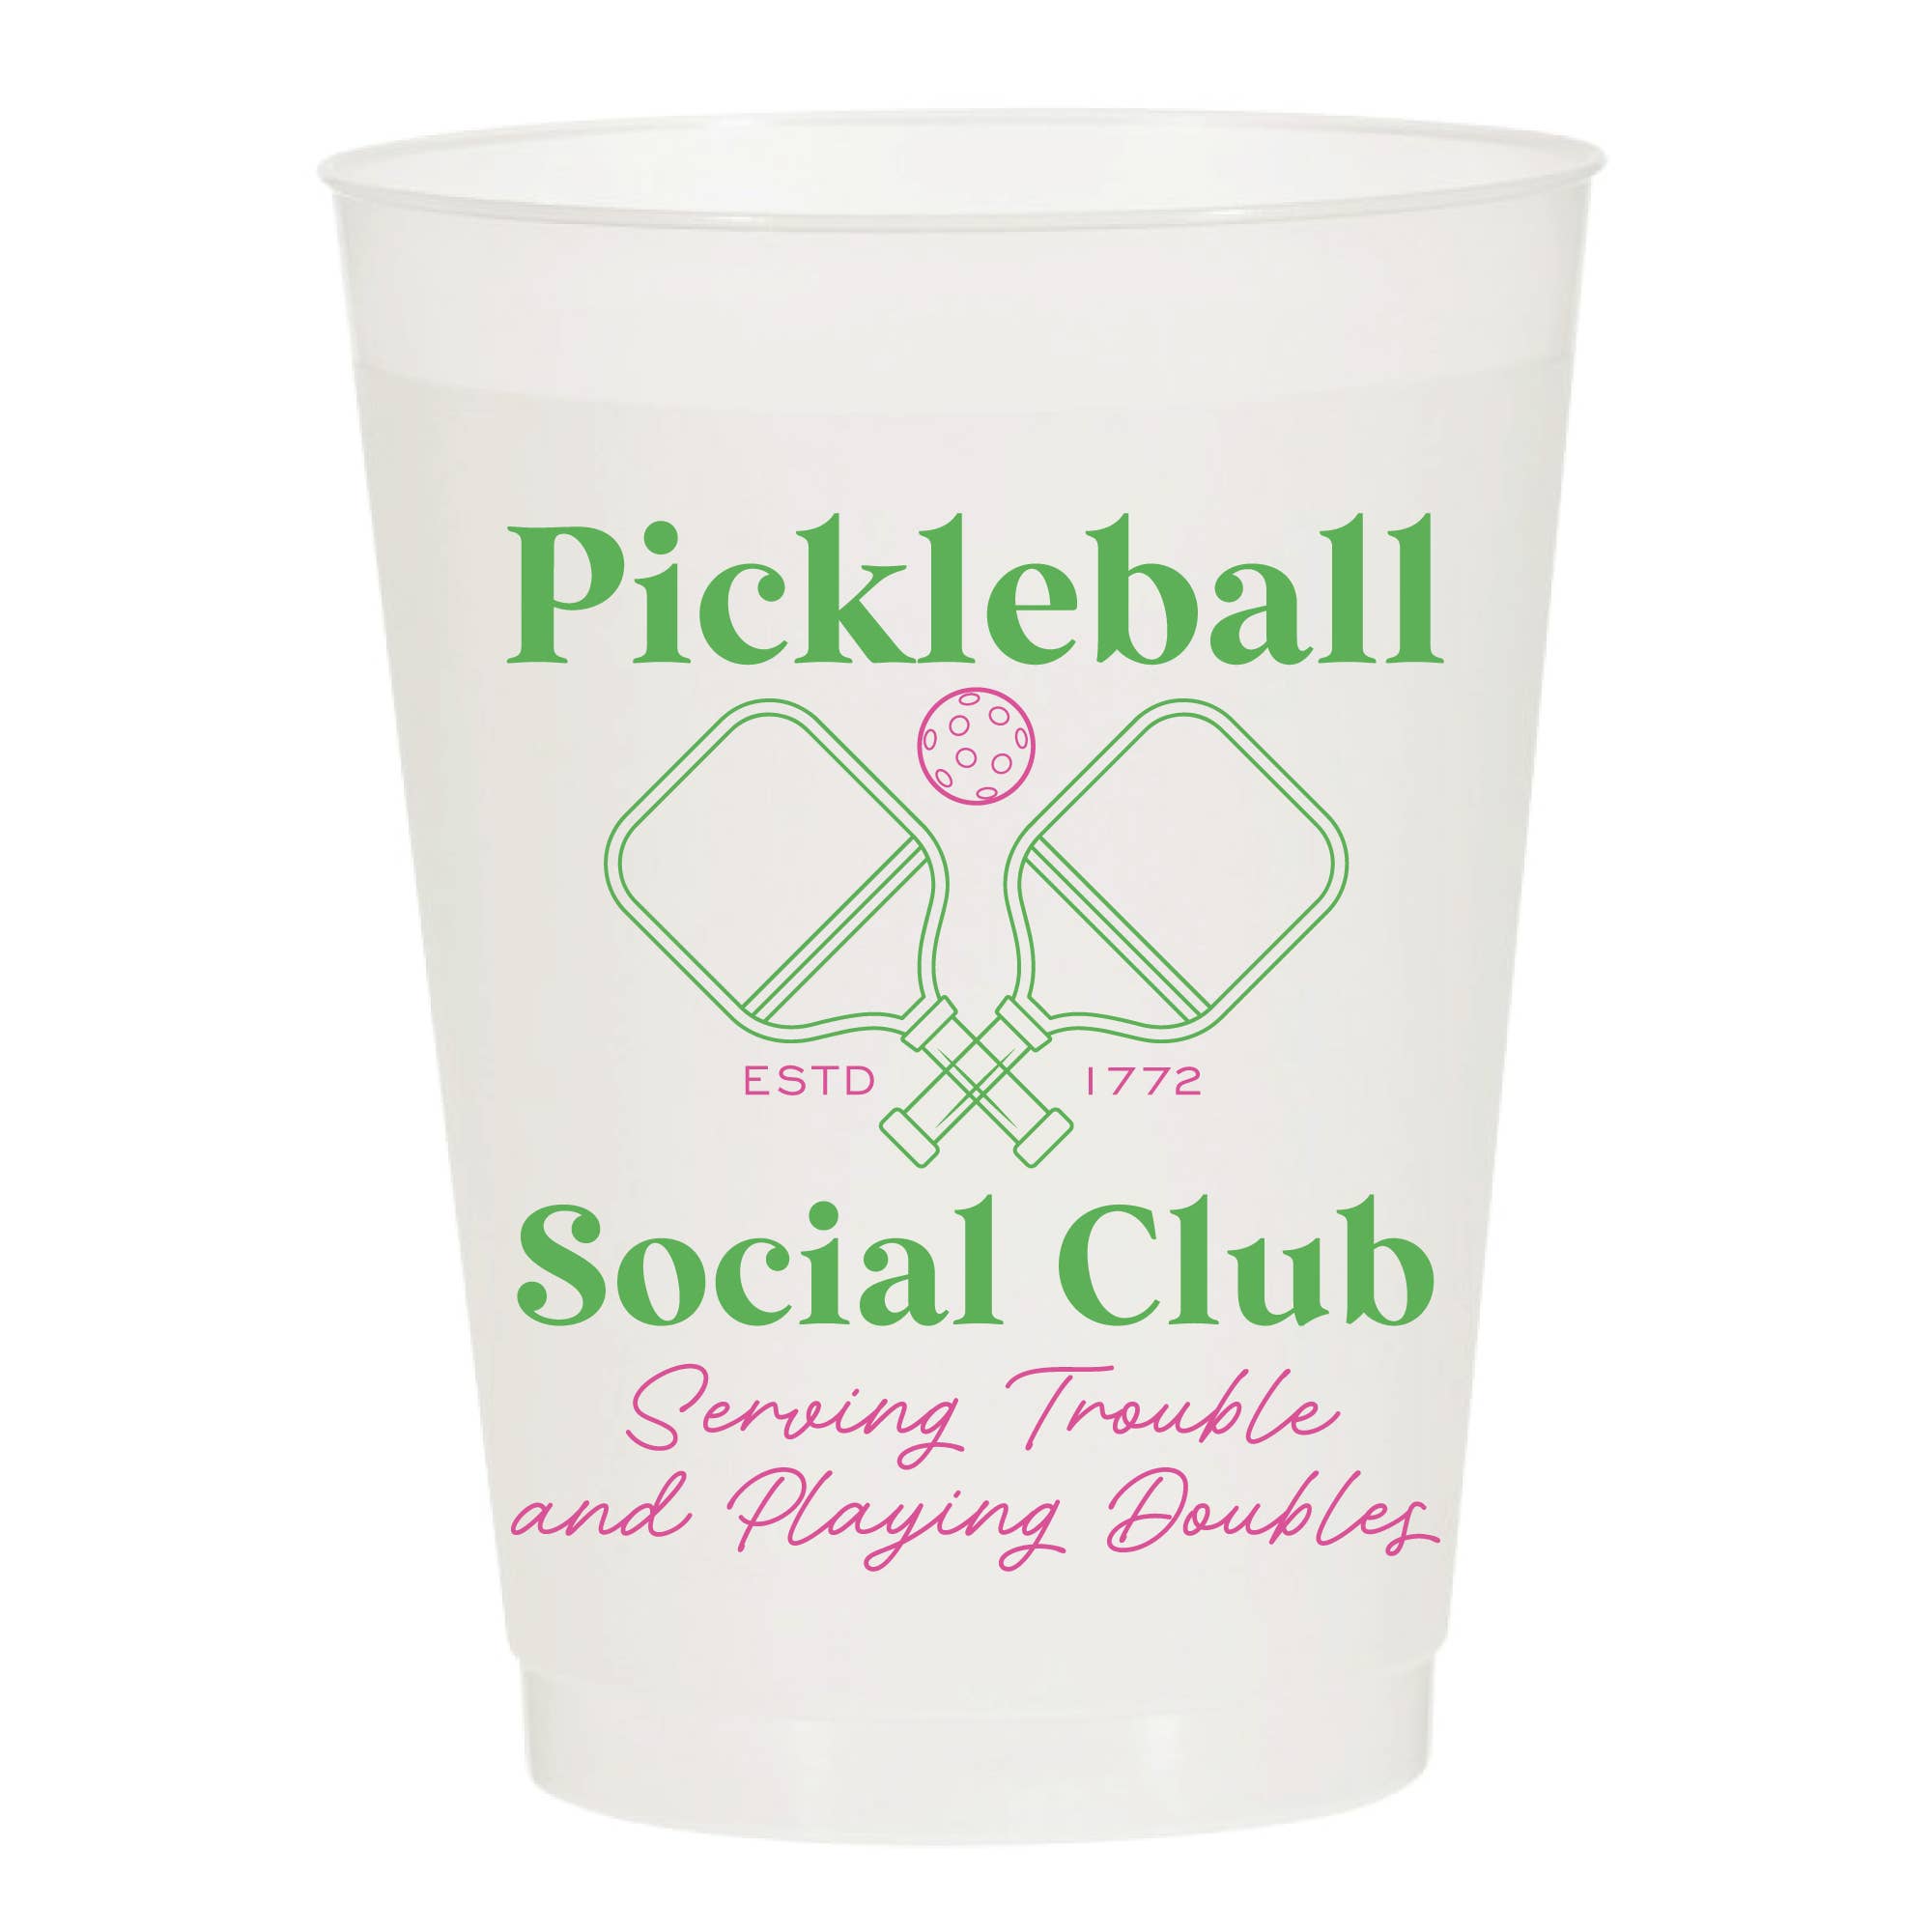 Pickleball Social Club Double Set Frosted Cups - The Preppy Bunny